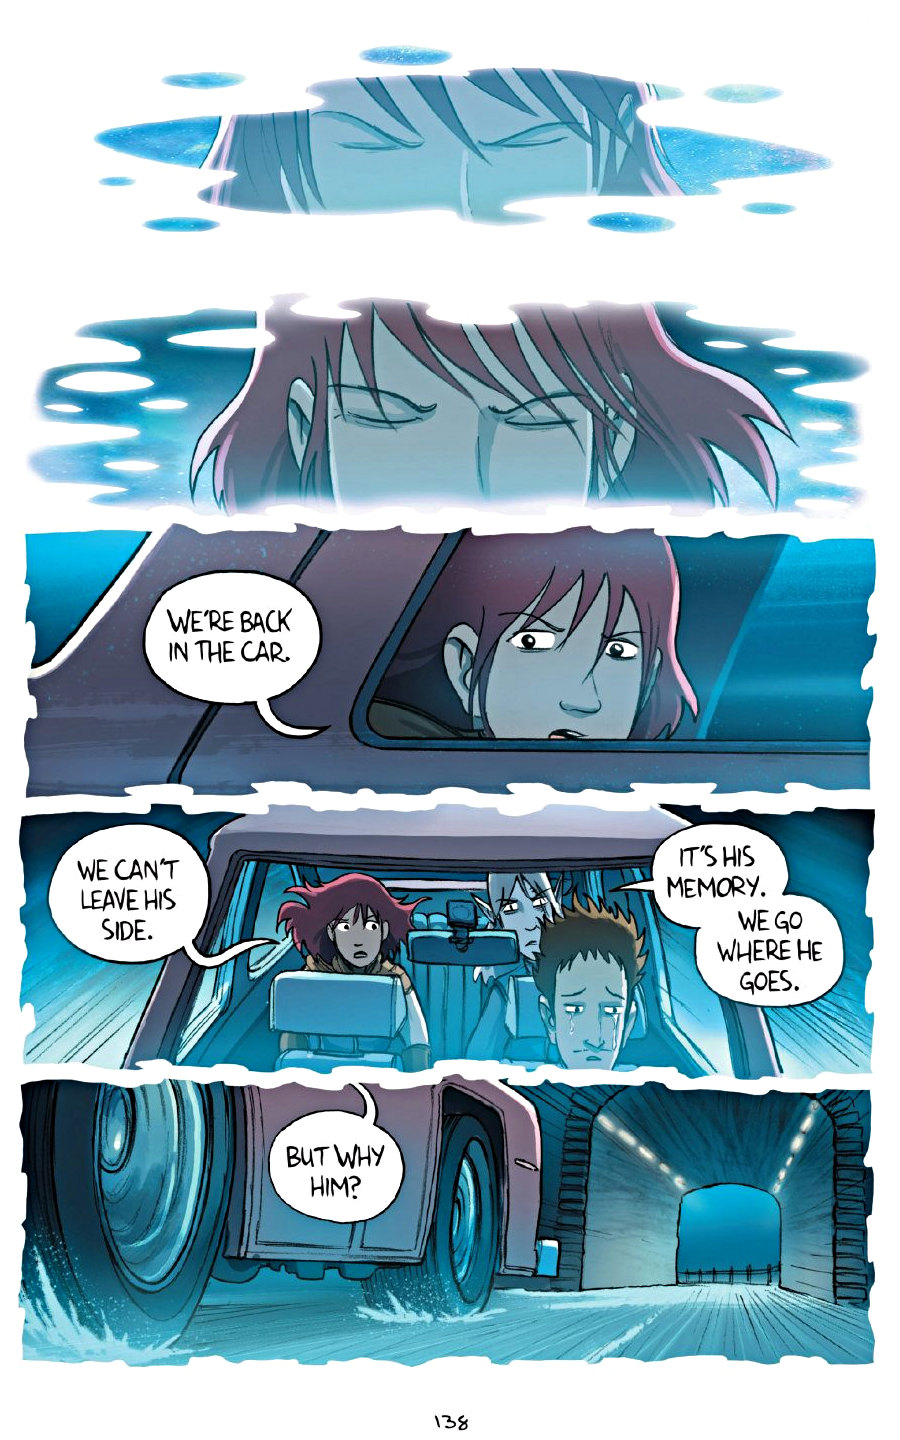 page 138 of amulet 7 firelight graphic novel